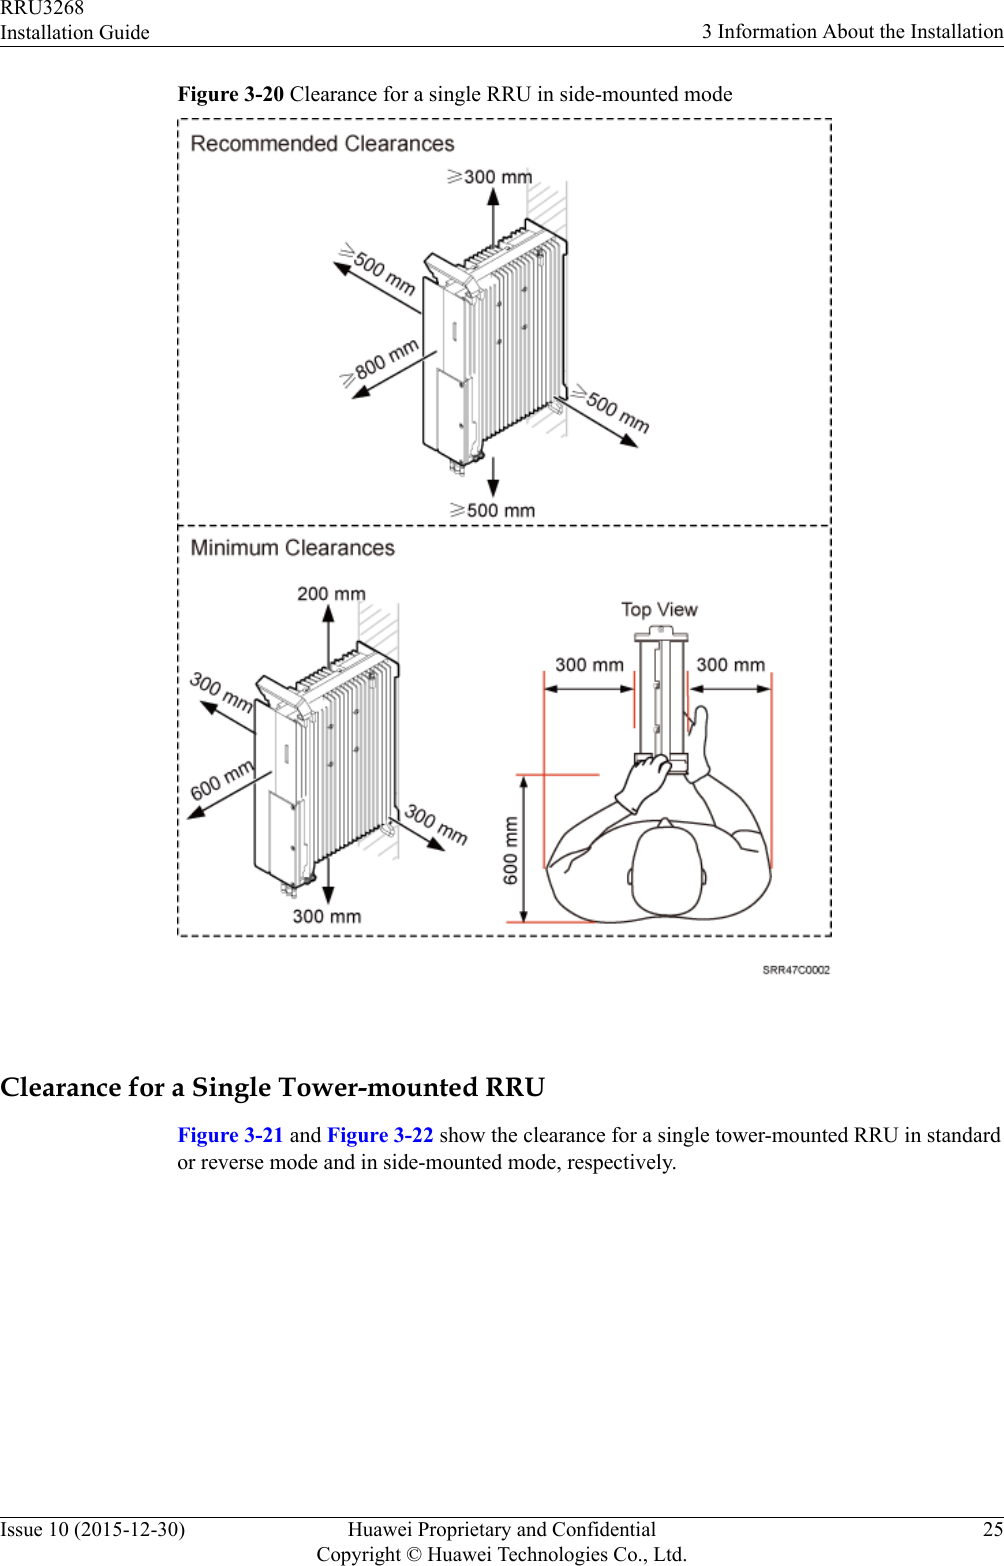 Figure 3-20 Clearance for a single RRU in side-mounted mode Clearance for a Single Tower-mounted RRUFigure 3-21 and Figure 3-22 show the clearance for a single tower-mounted RRU in standardor reverse mode and in side-mounted mode, respectively.RRU3268Installation Guide 3 Information About the InstallationIssue 10 (2015-12-30) Huawei Proprietary and ConfidentialCopyright © Huawei Technologies Co., Ltd.25